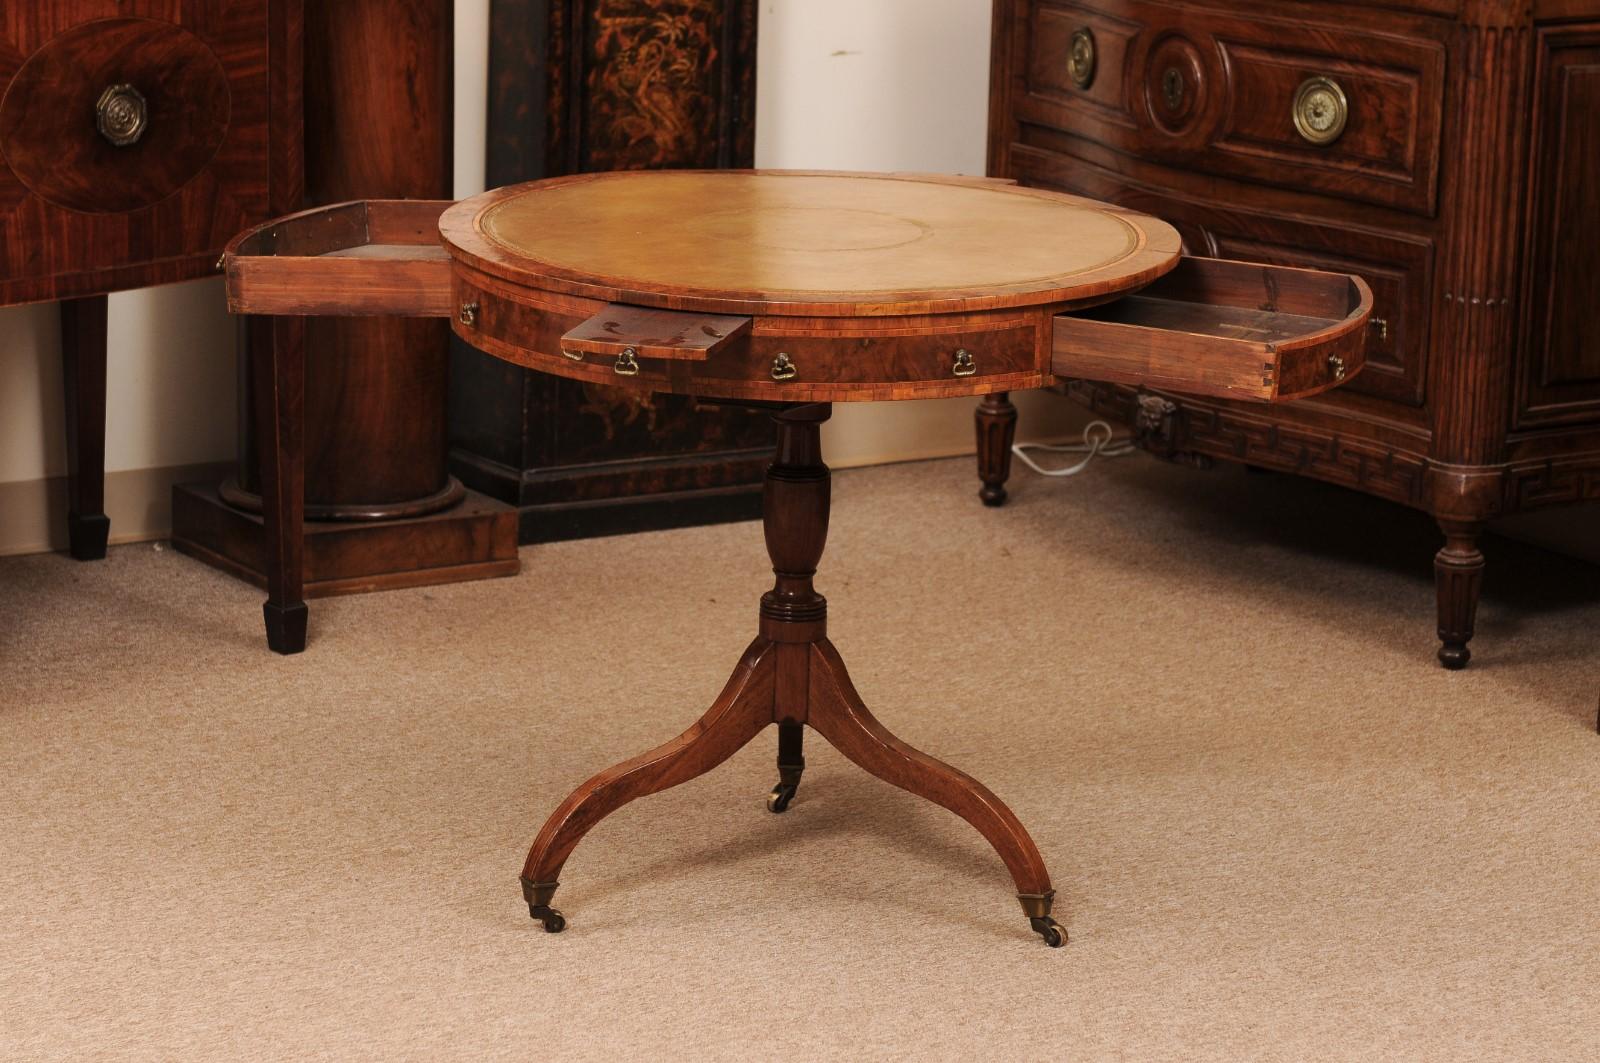 18th Century English Small Mulberry Drum Table with Inlay & Leather Top For Sale 1